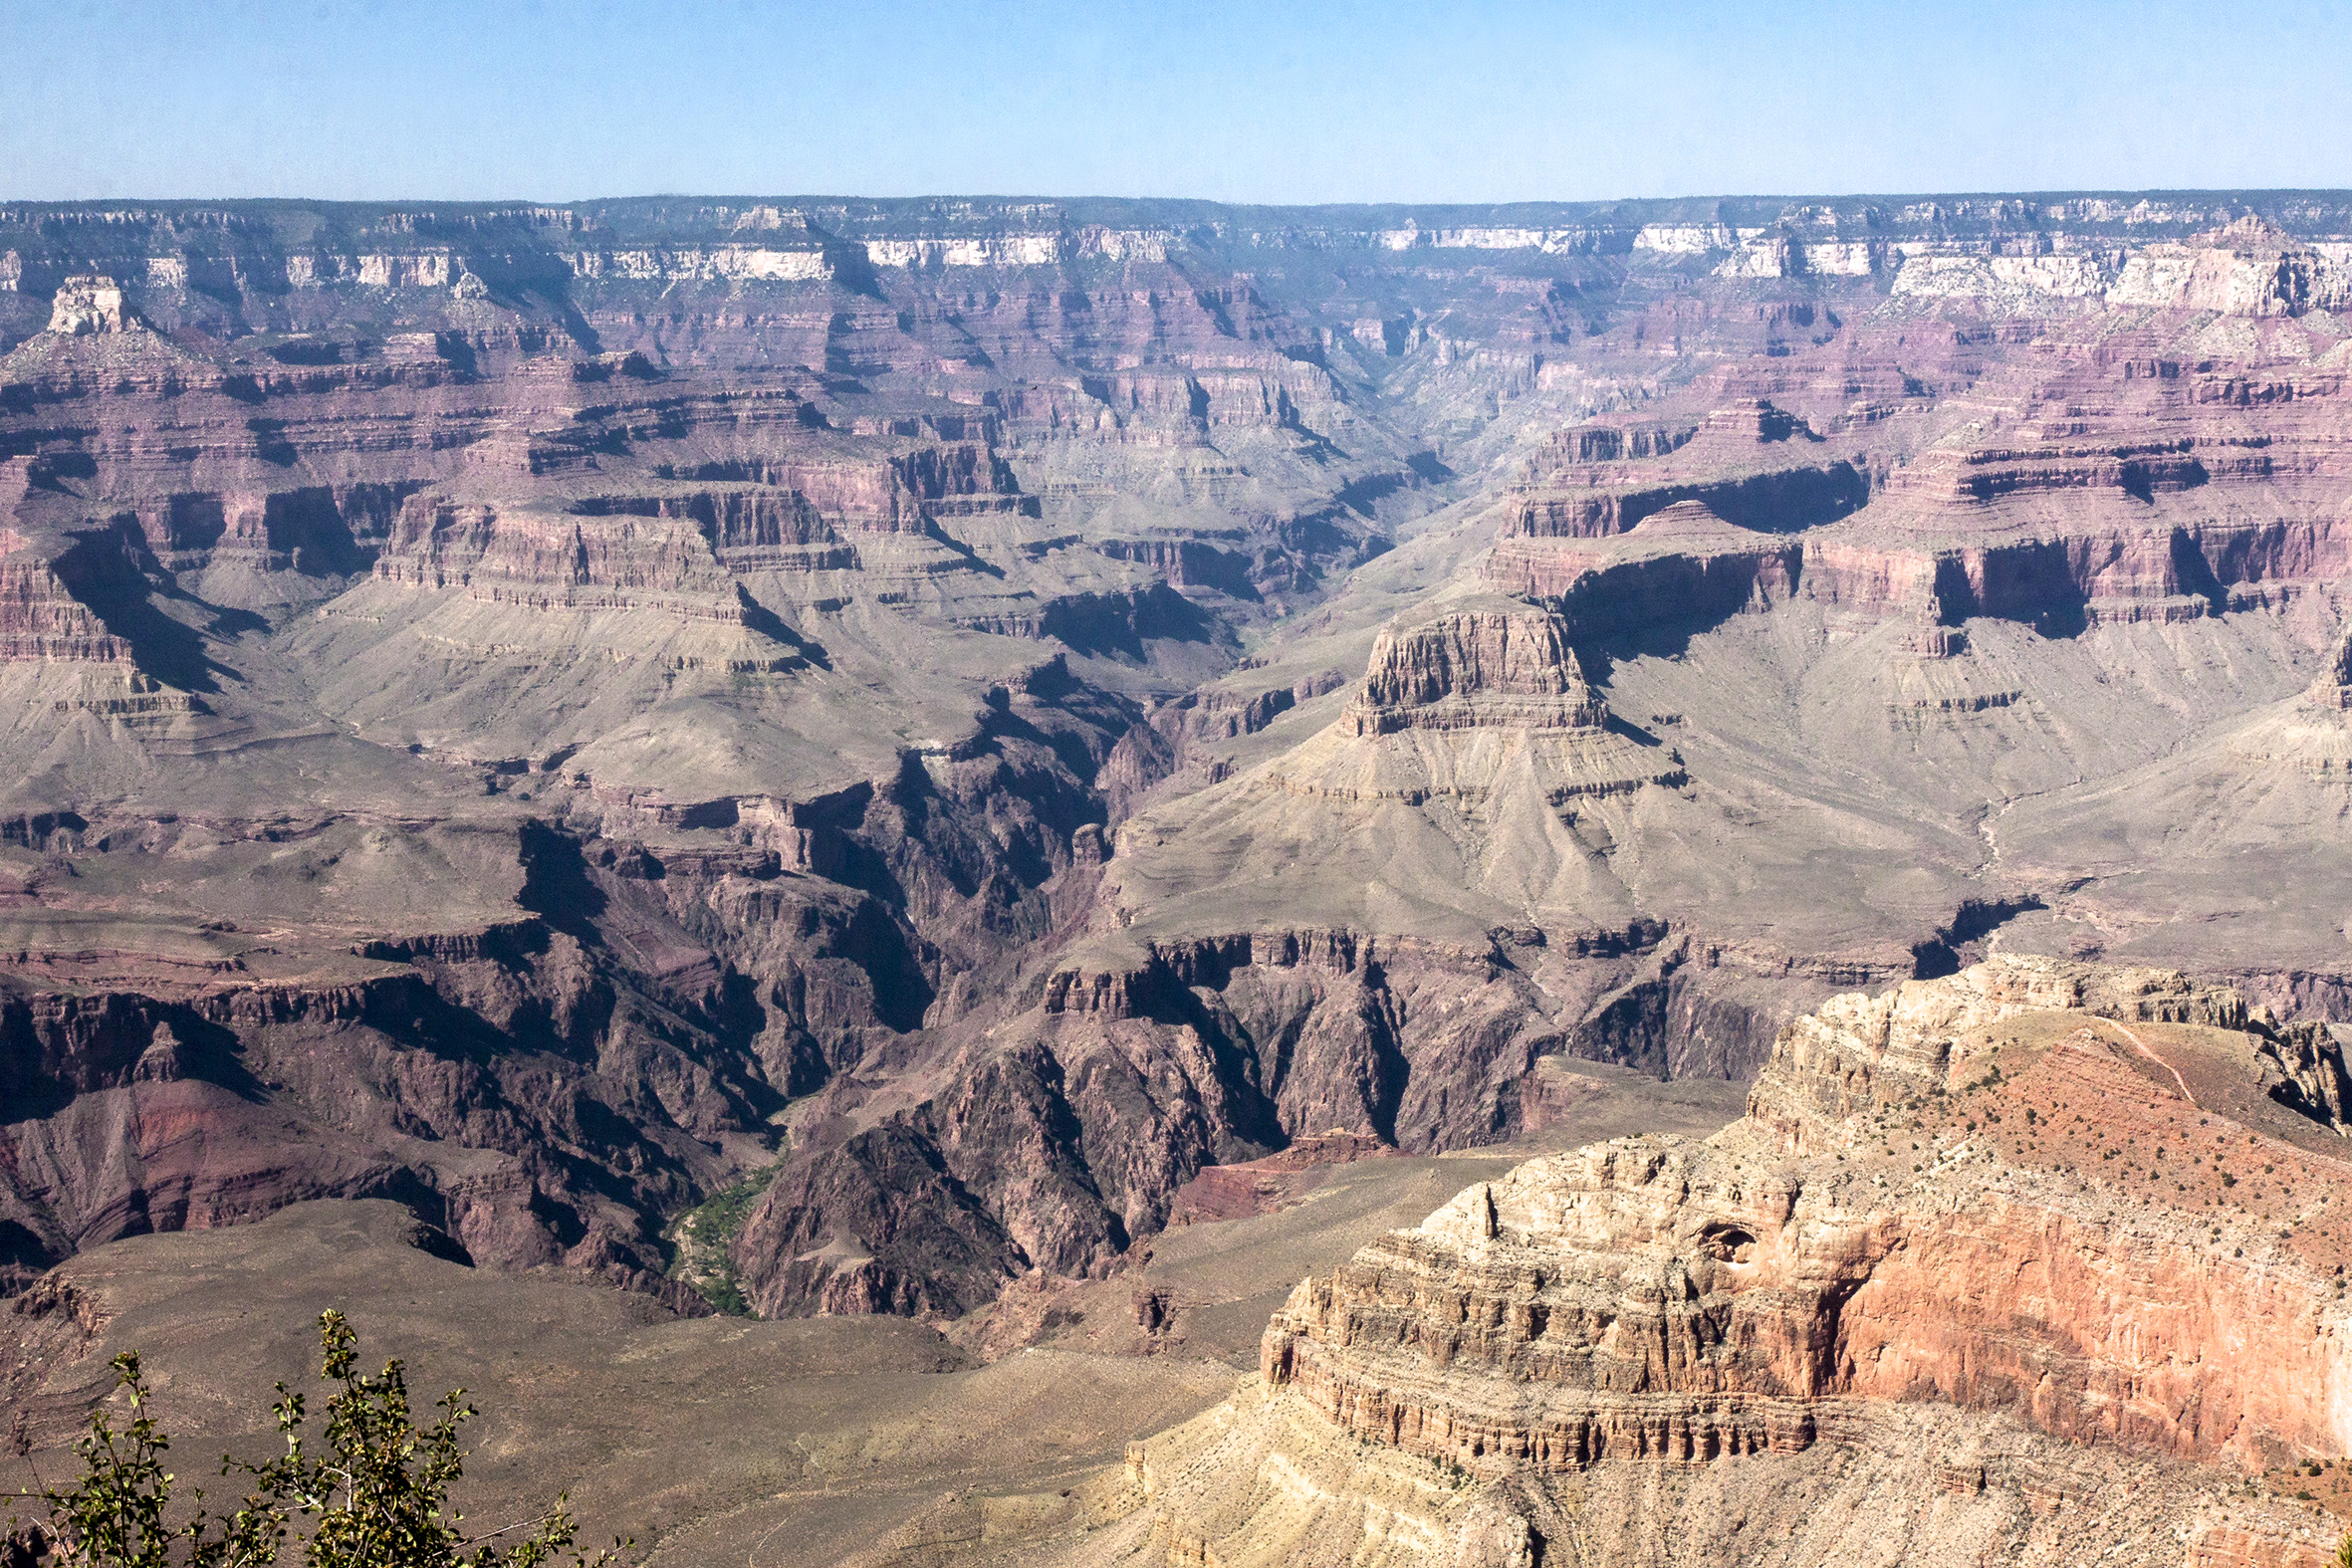 voyages-grand-canyon-usa-ouest-2012-marie-colette-becker-11